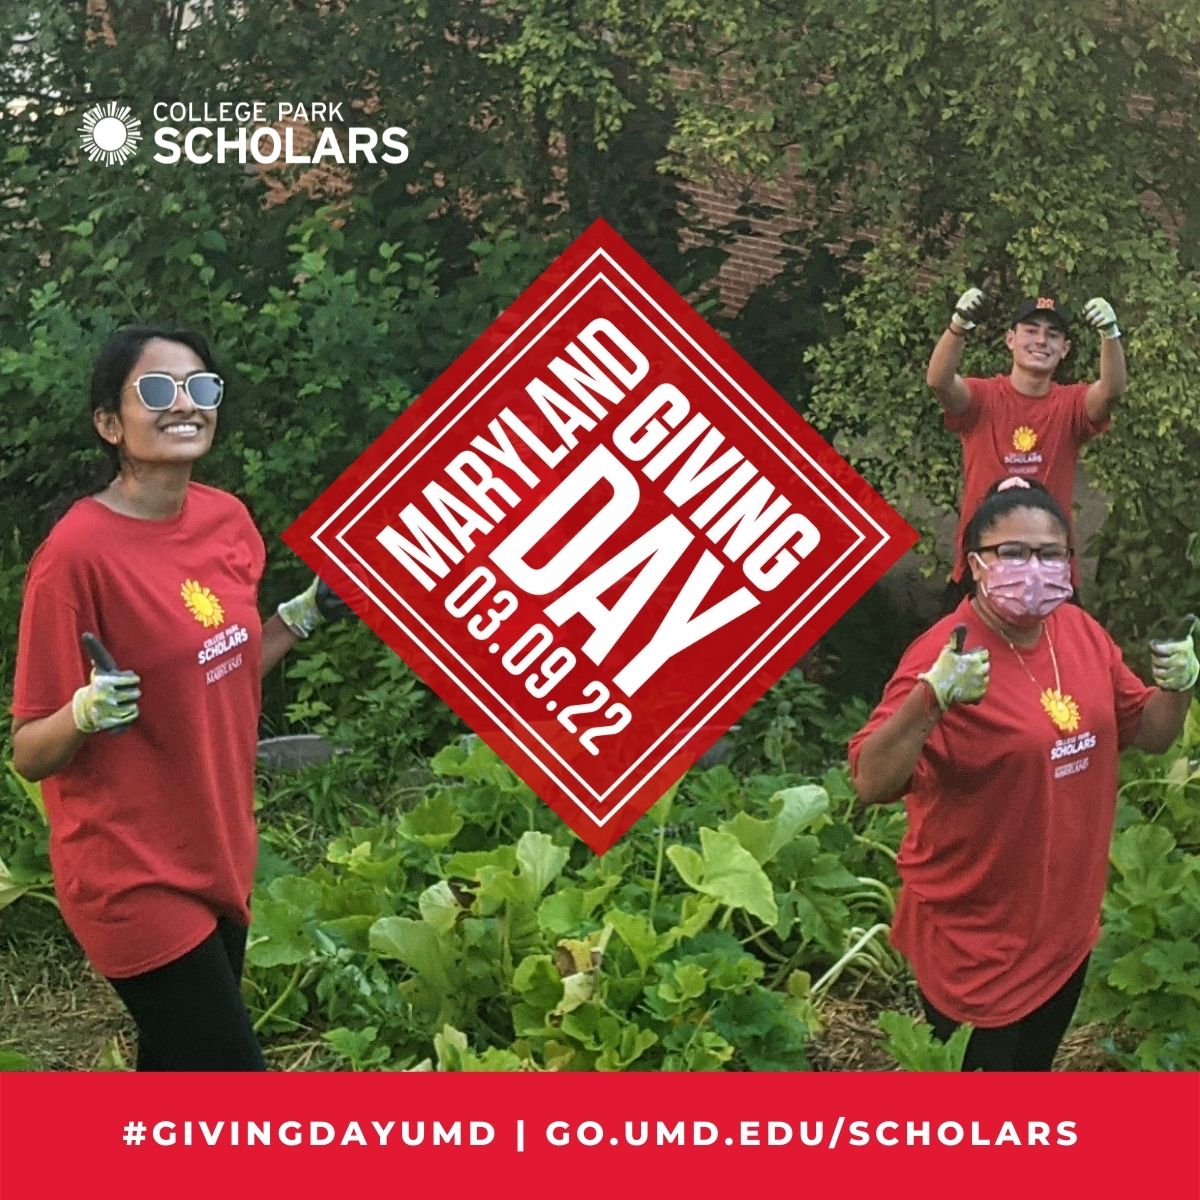 Giving Day graphic with photo of students posing with their thumbs up and Giving Day URL, go.umd.edu/Scholars